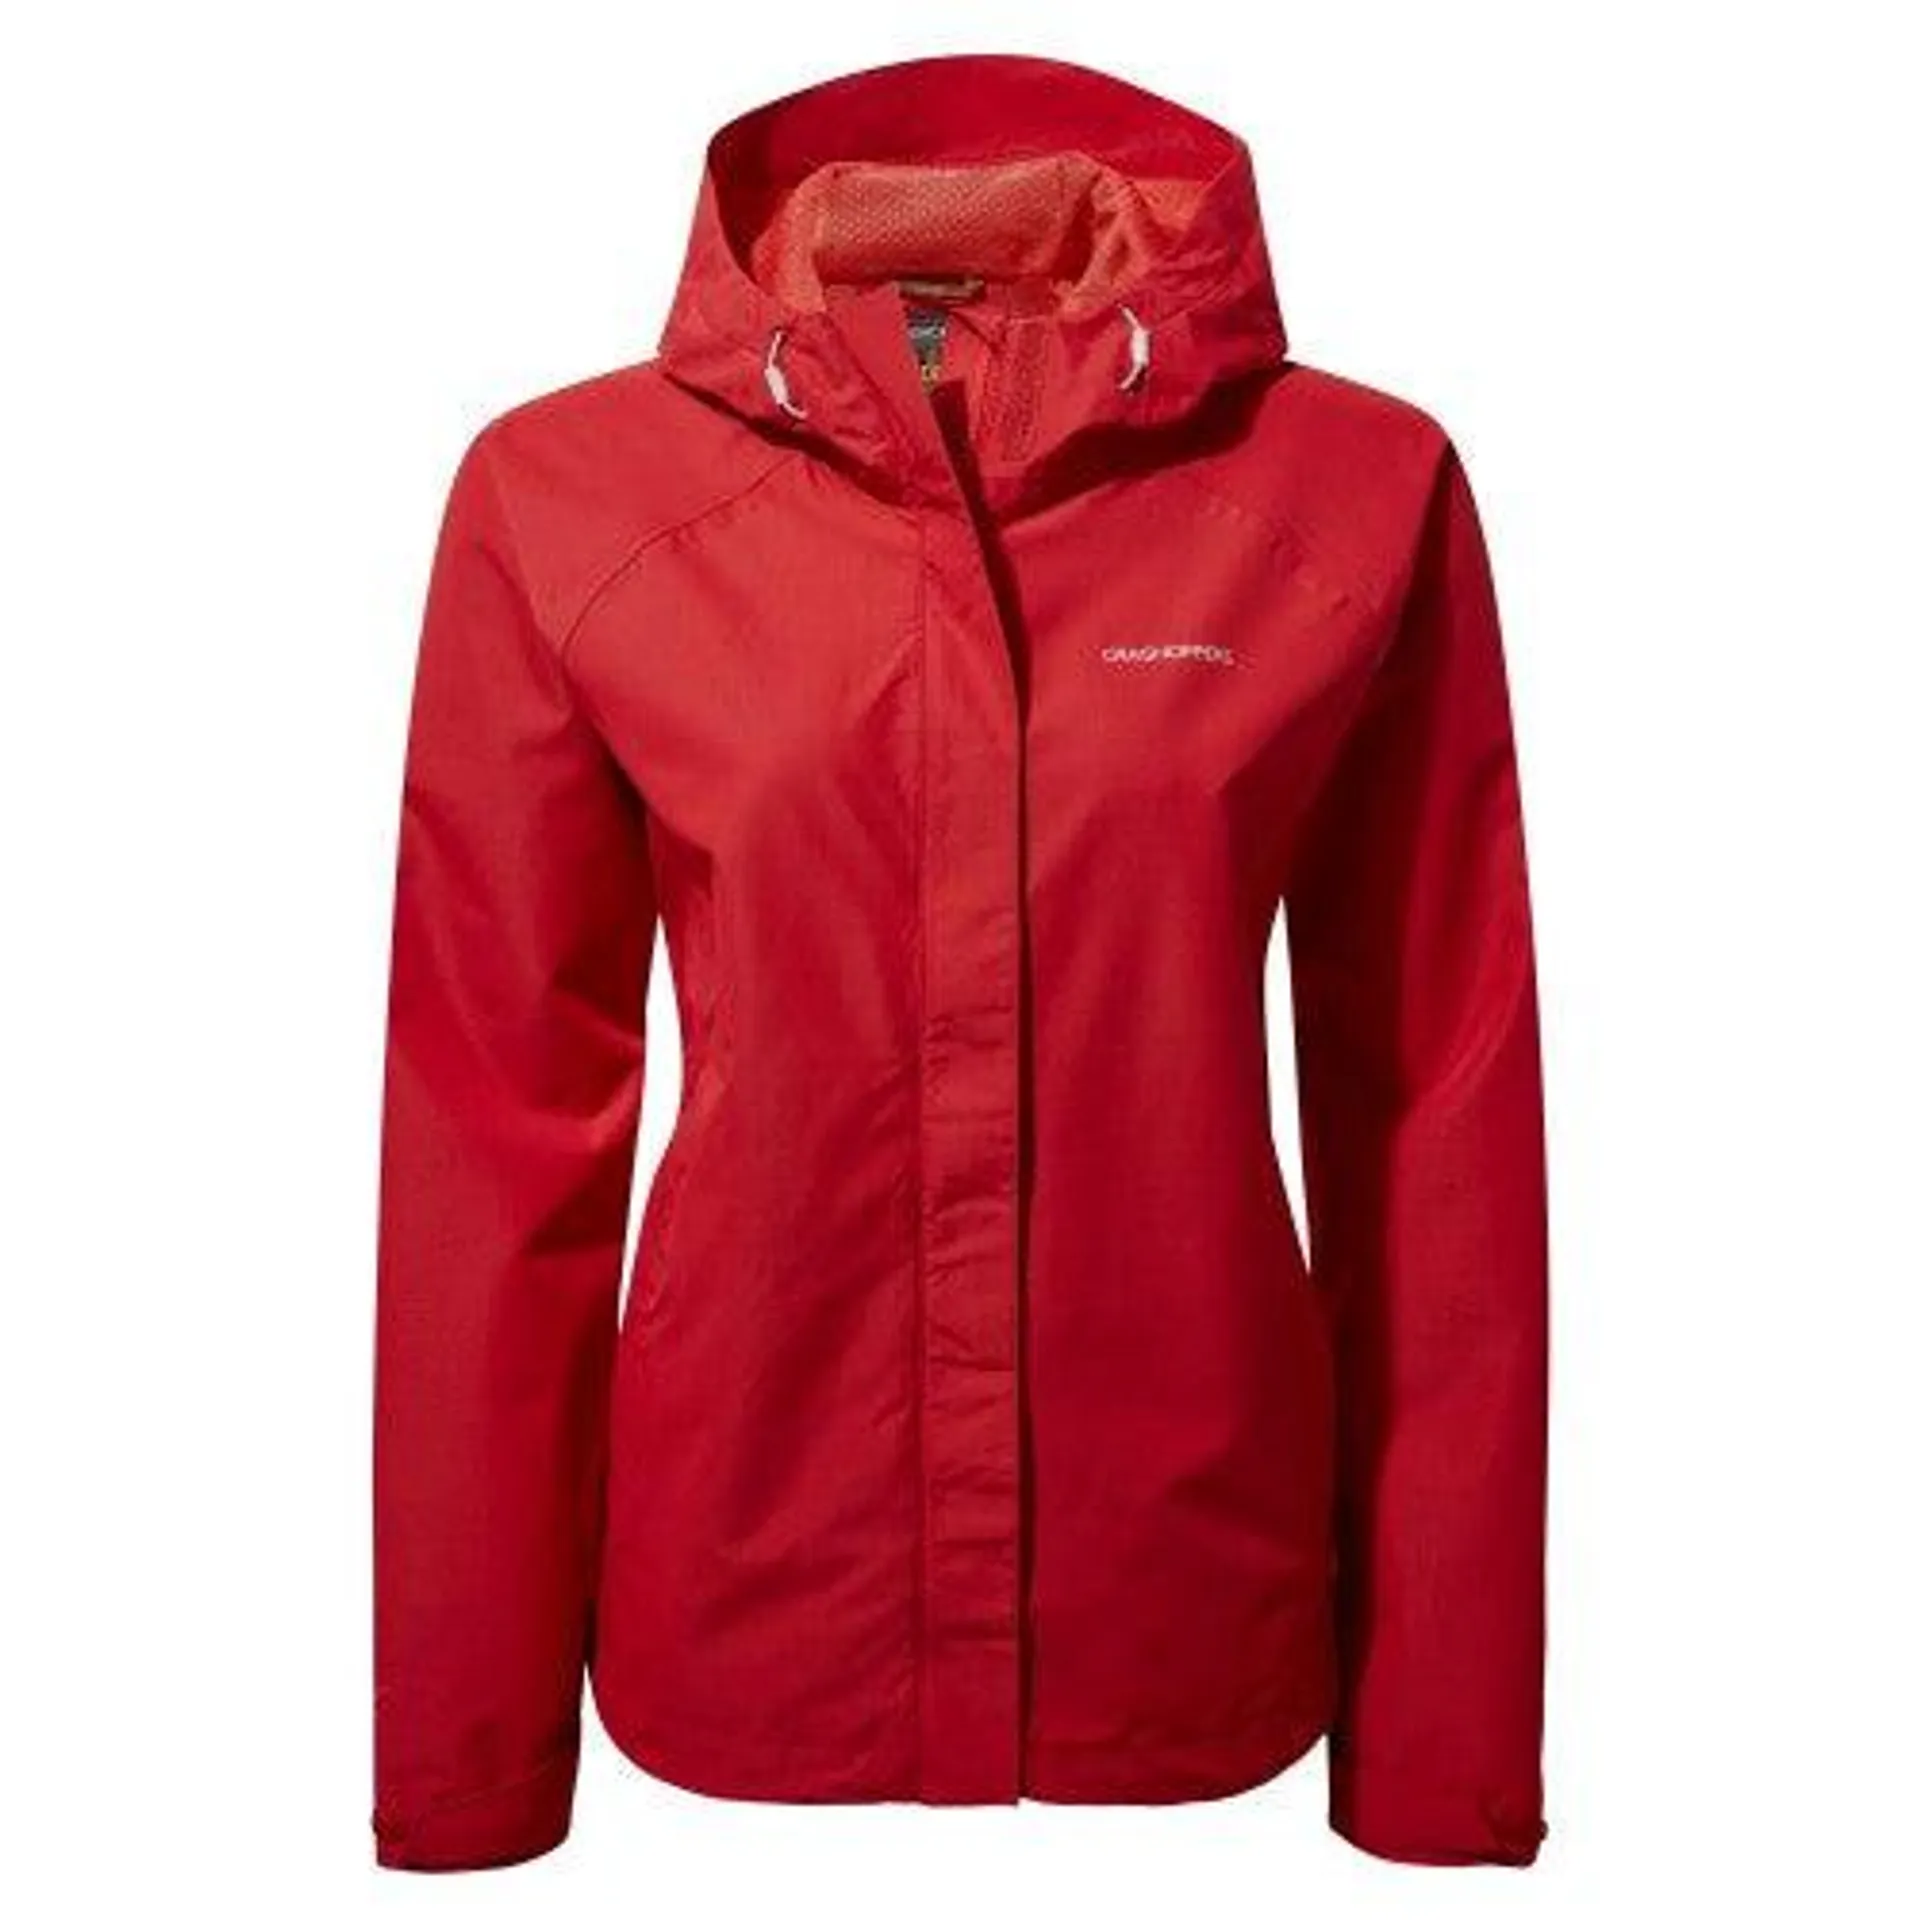 Craghoppers Womens/Ladies Orion Jacket